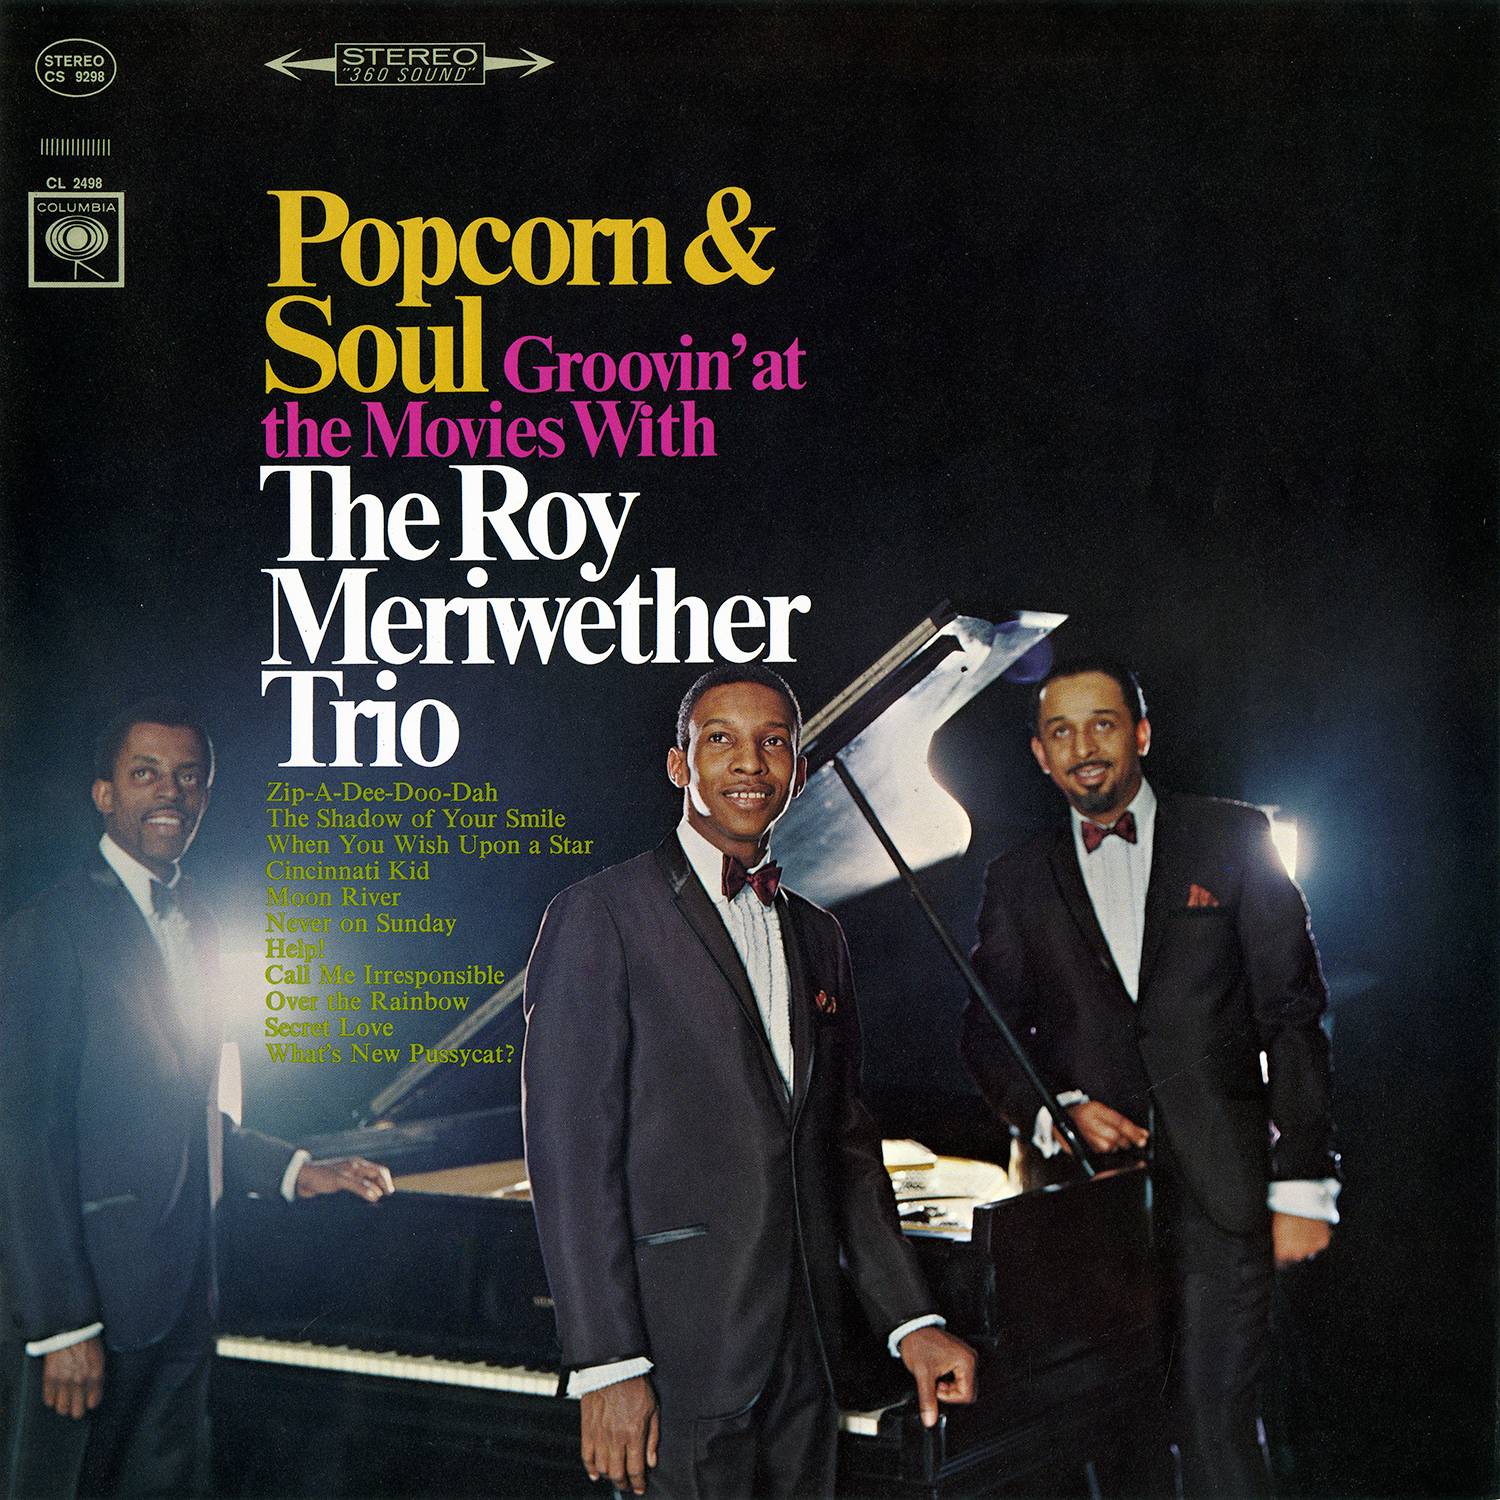 Roy Meriwether Trio – Popcorn And Soul: Groovin At The Movies (1966/2016) [AcousticSounds FLAC 24bit/192kHz]